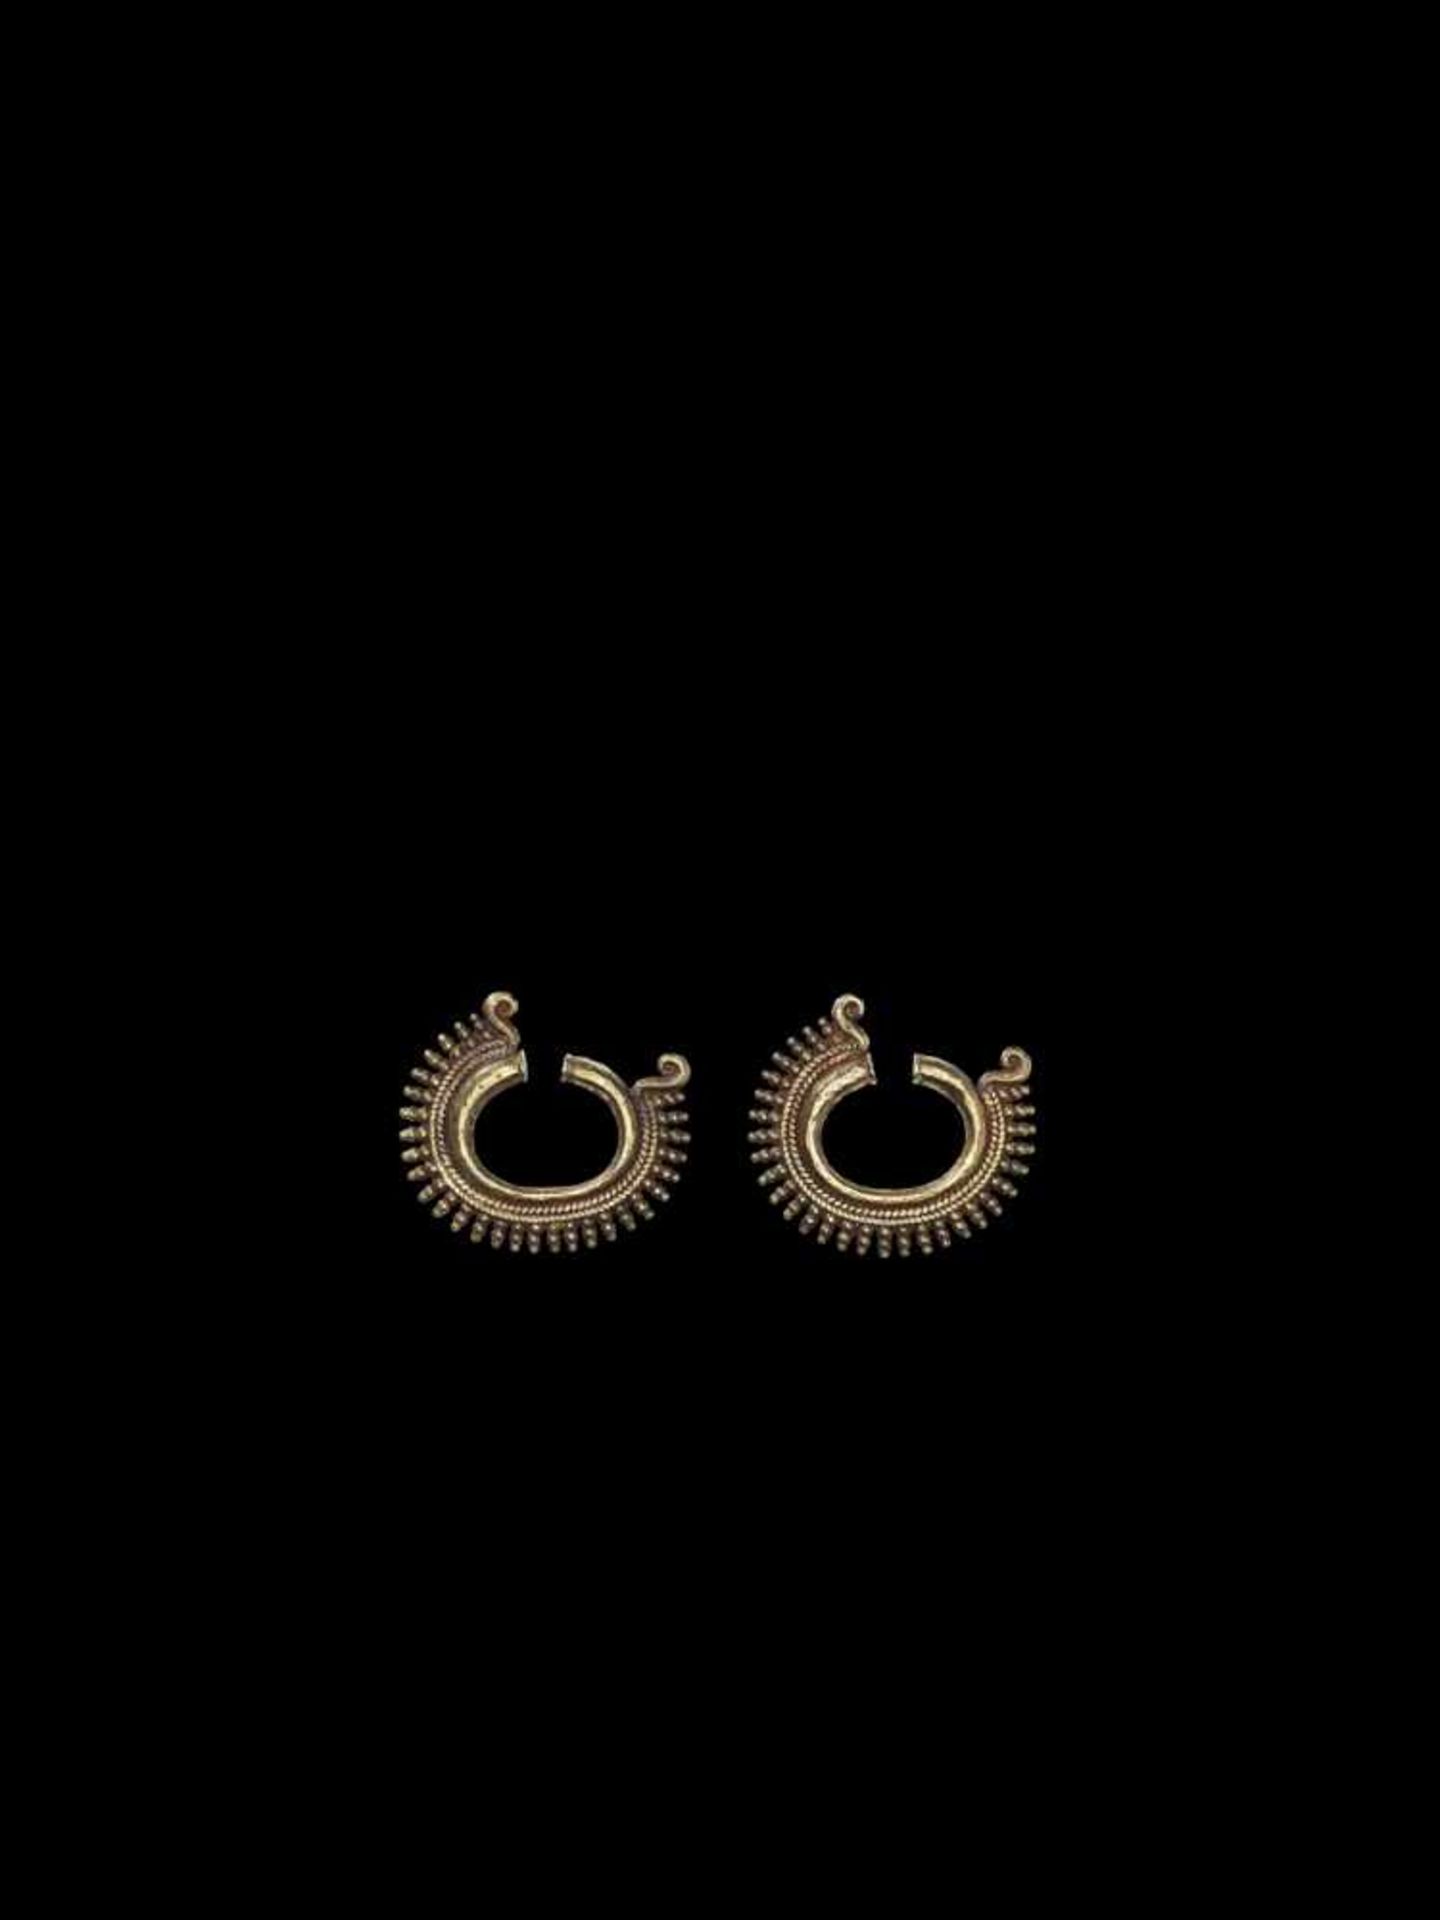 A PAIR OF OPEN RING-SHAPED MINDANAO GOLD EAR ORNAMENTS Philippines, Mindanao, 8th – 13th century. - Image 4 of 4